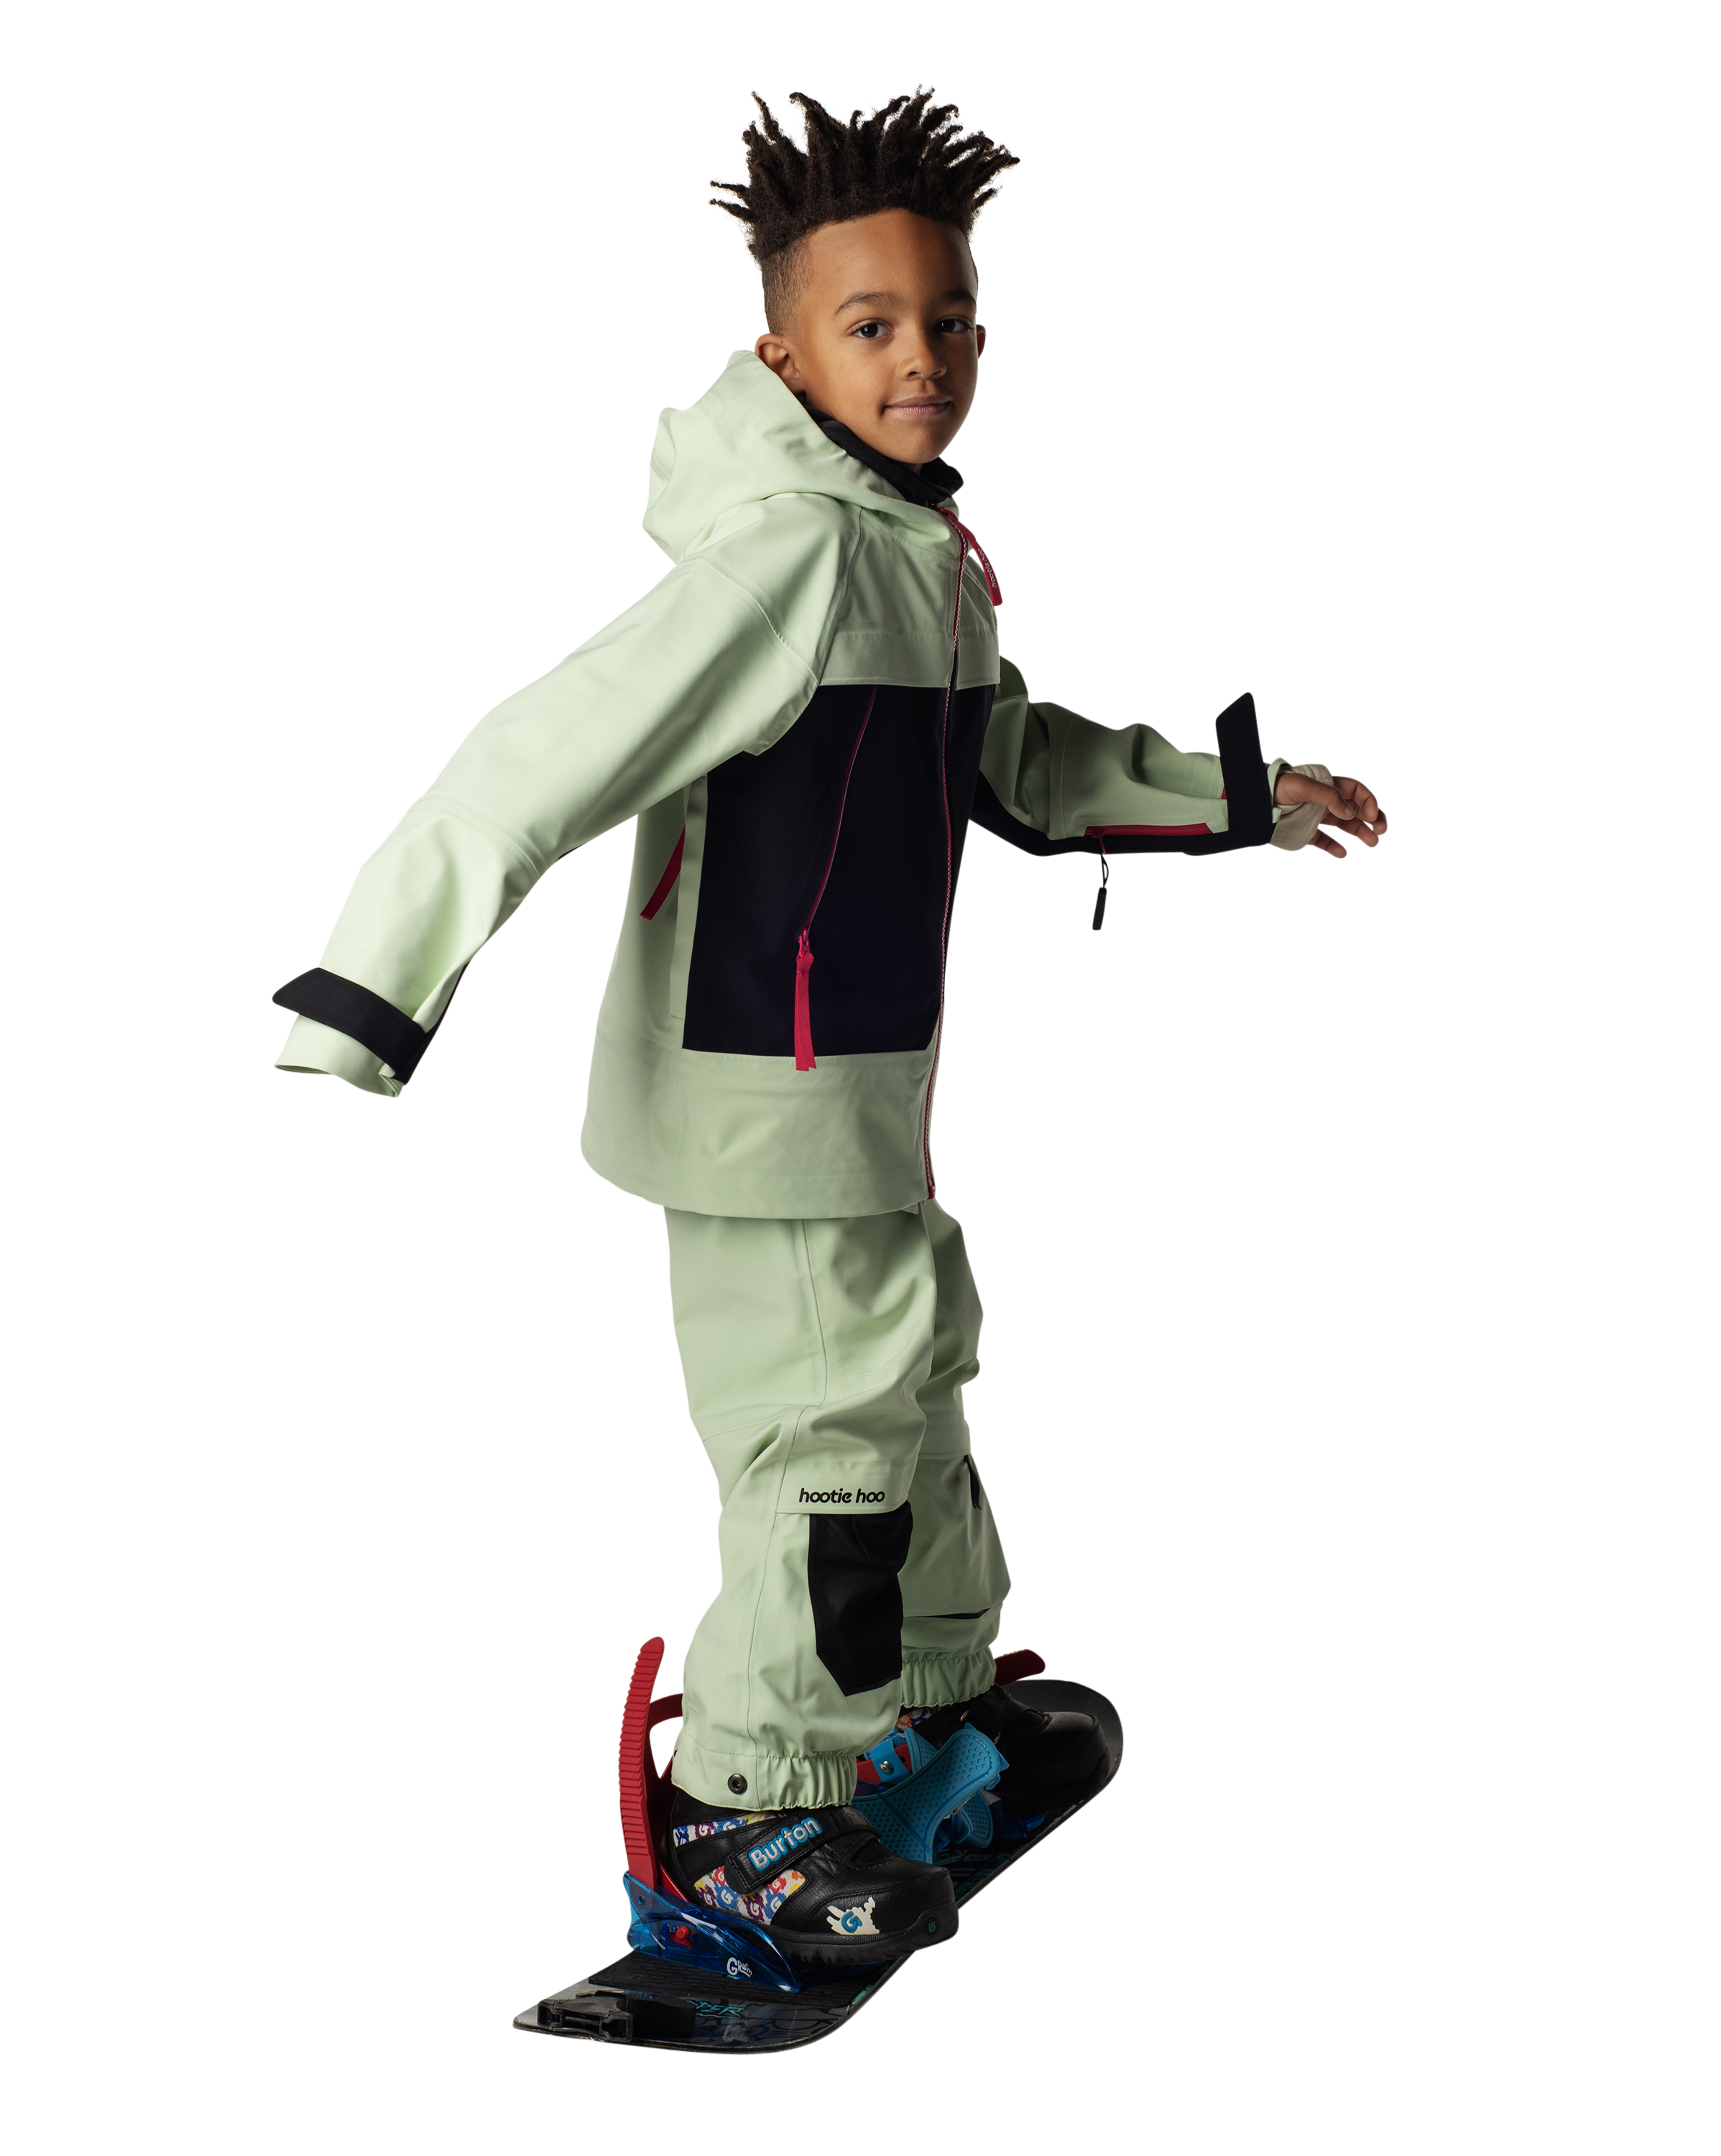 Tiptop Kids 3L Shell Jacket for Skiing & Snowboarding